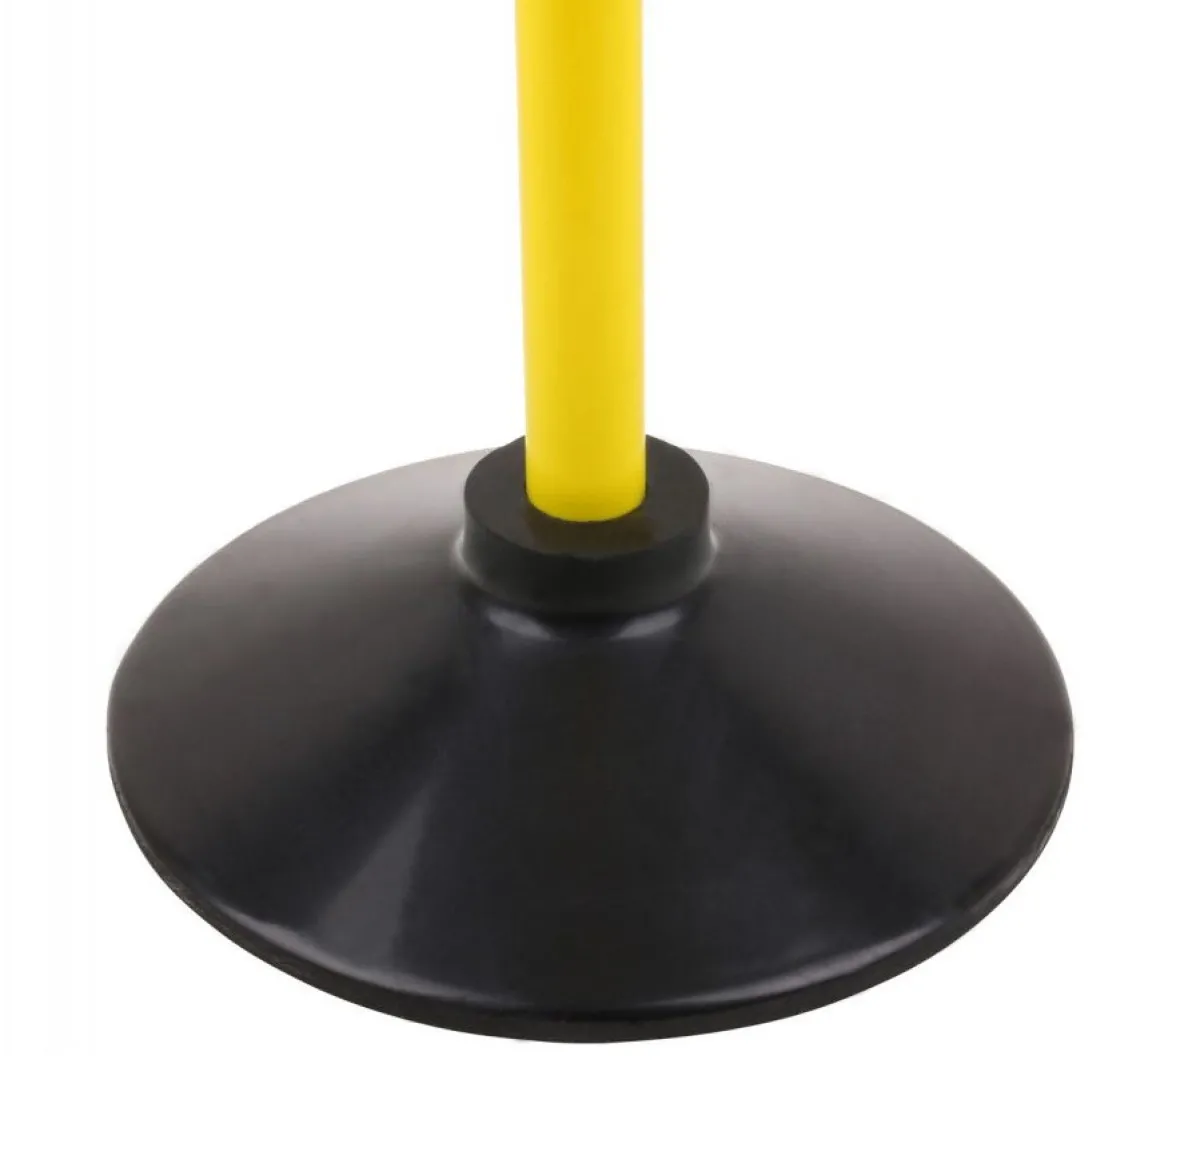 Rubber base for coordination bars.